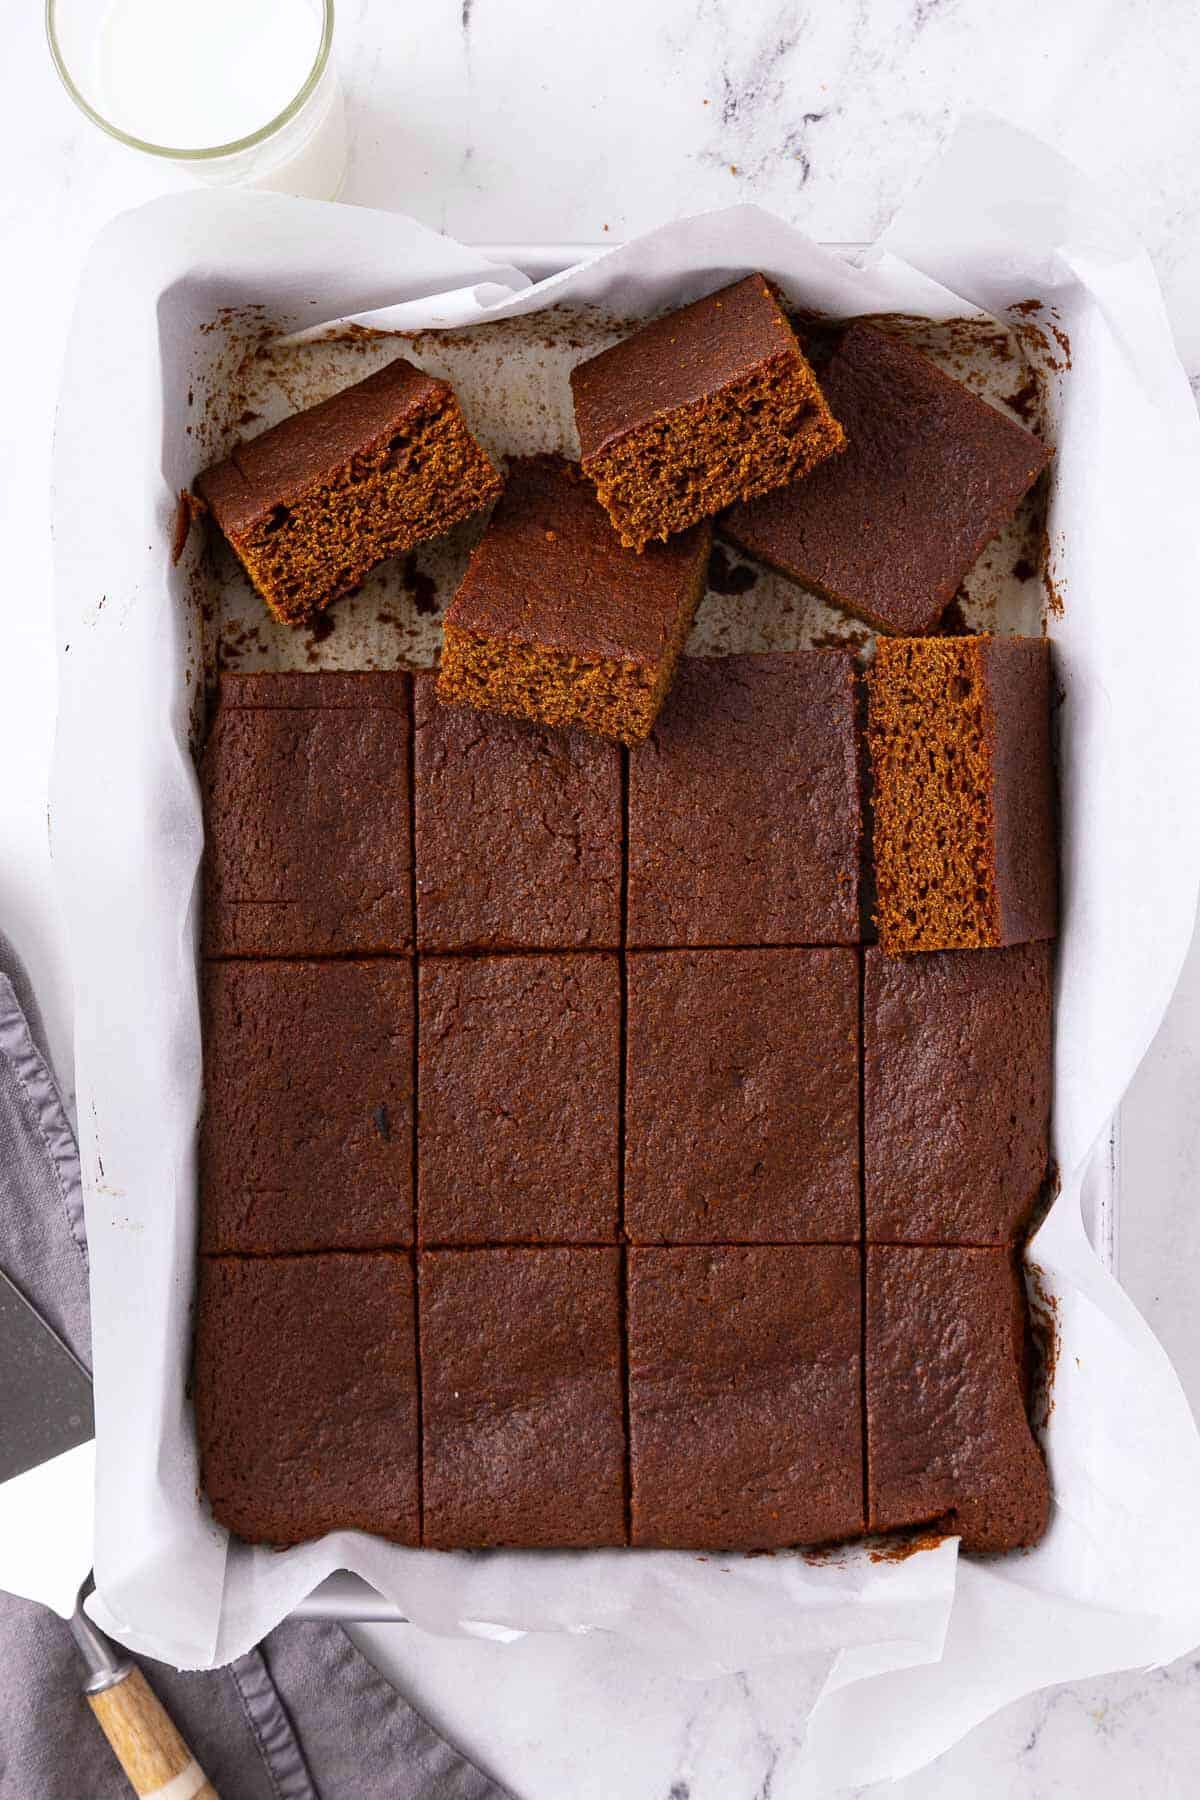 Gingerbread in cake pan cut into squares.